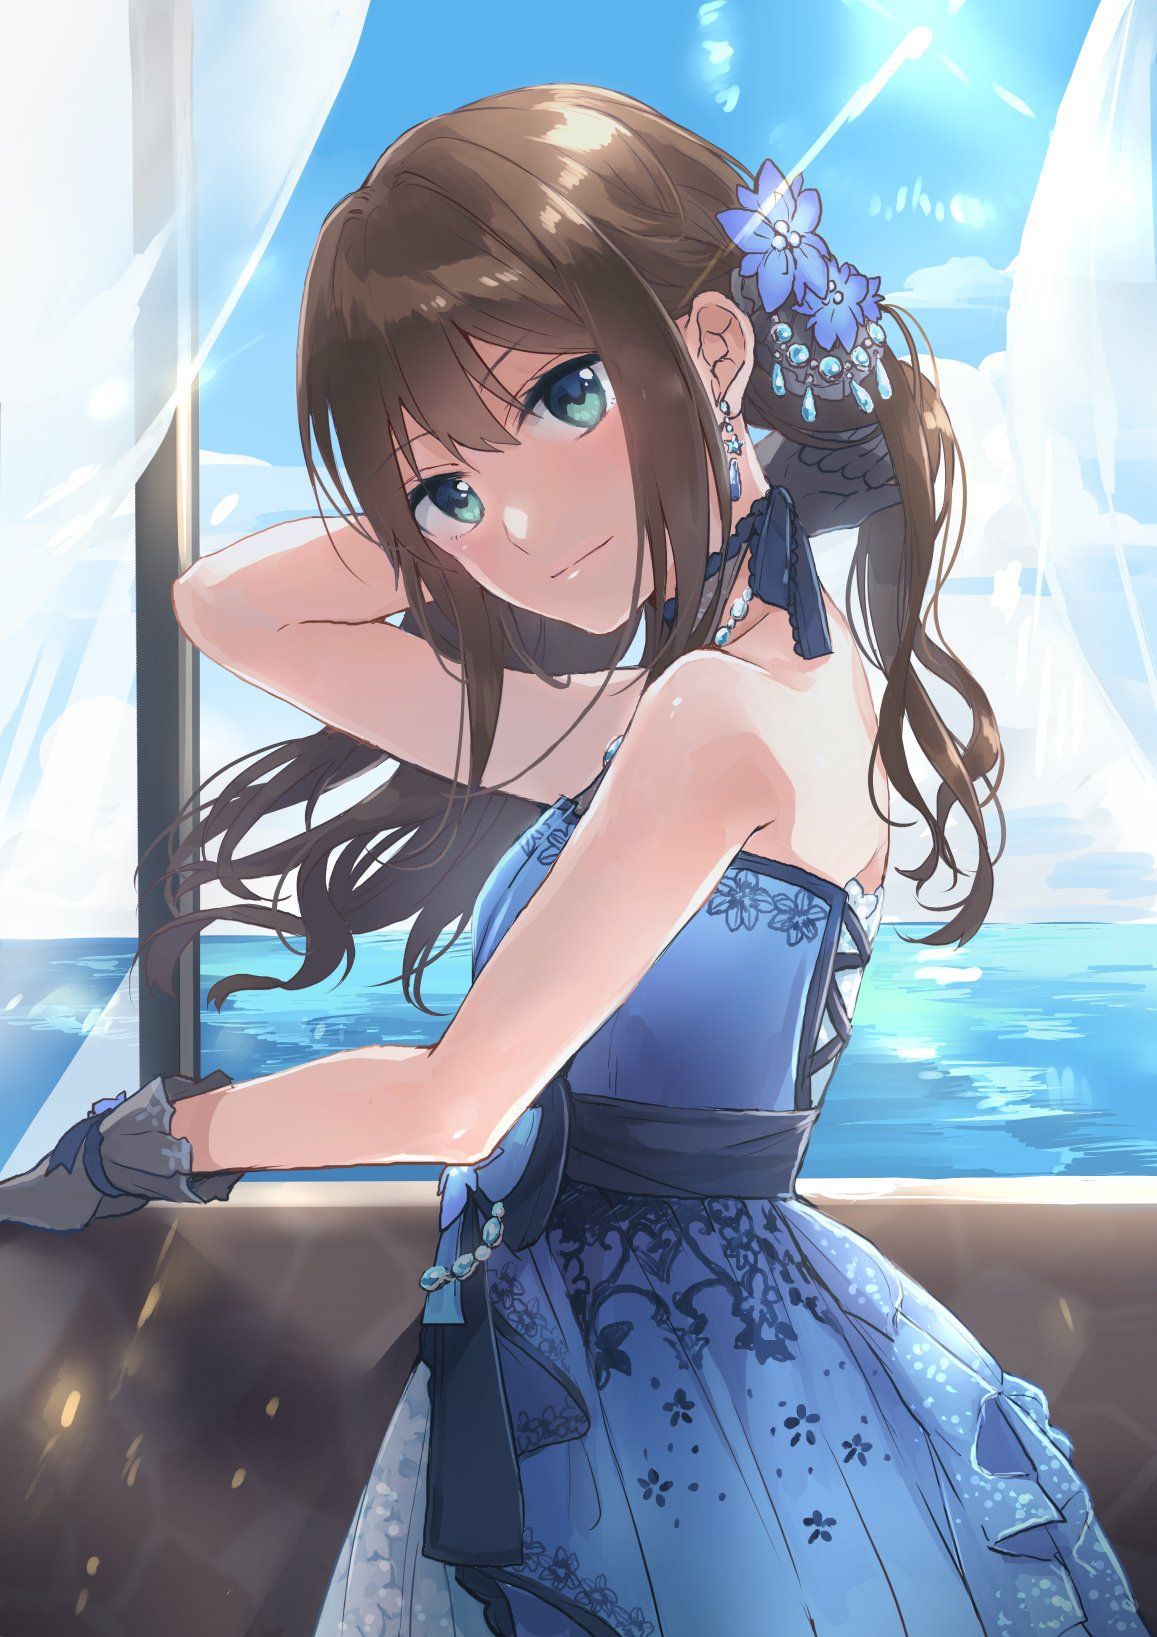 [Secondary ZIP] cool and sometimes roughing de mas Shibuya Rin-chan's image roundup 100 pieces 40